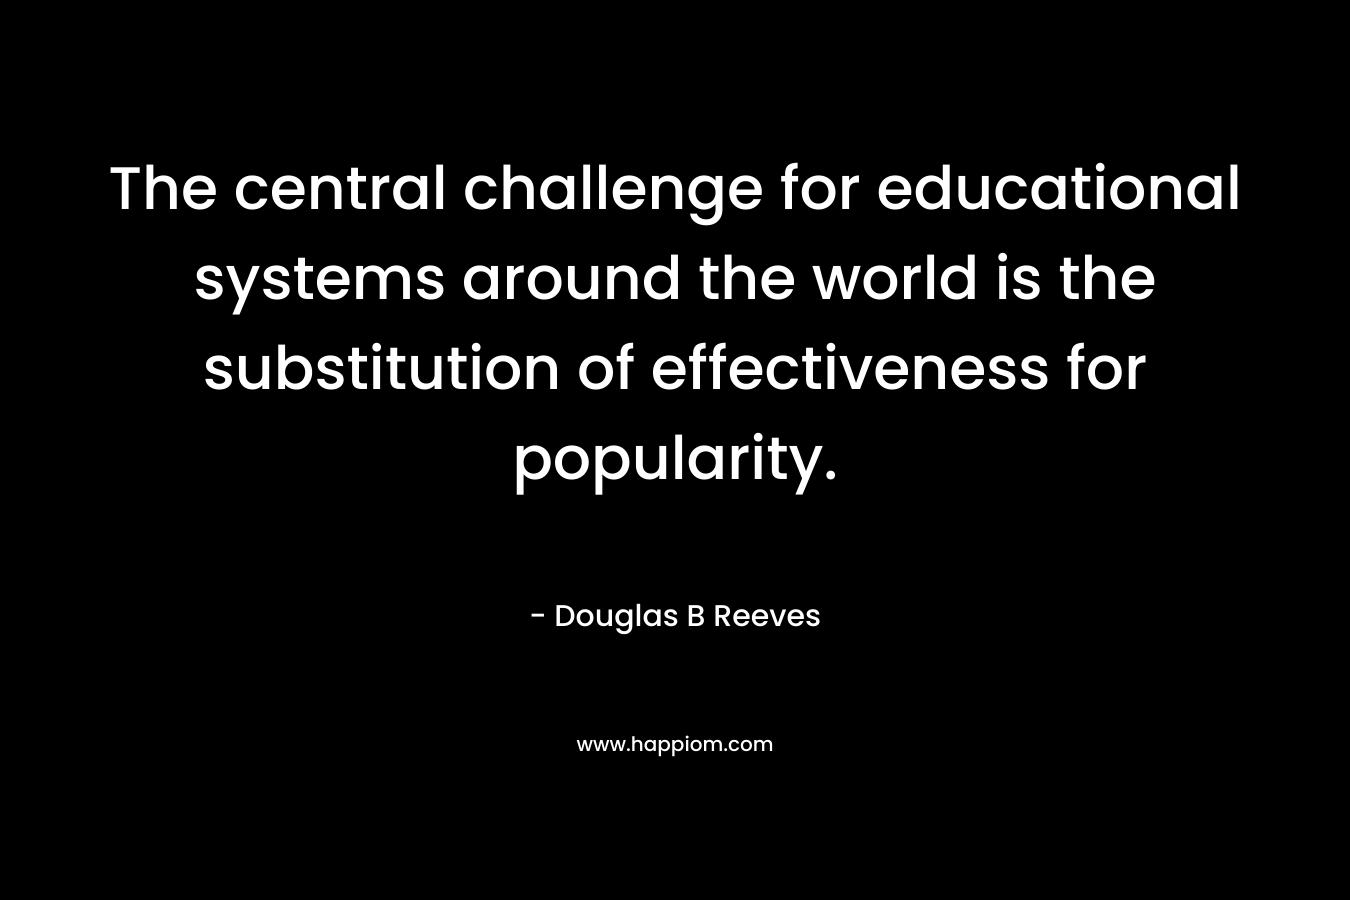 The central challenge for educational systems around the world is the substitution of effectiveness for popularity. – Douglas B Reeves